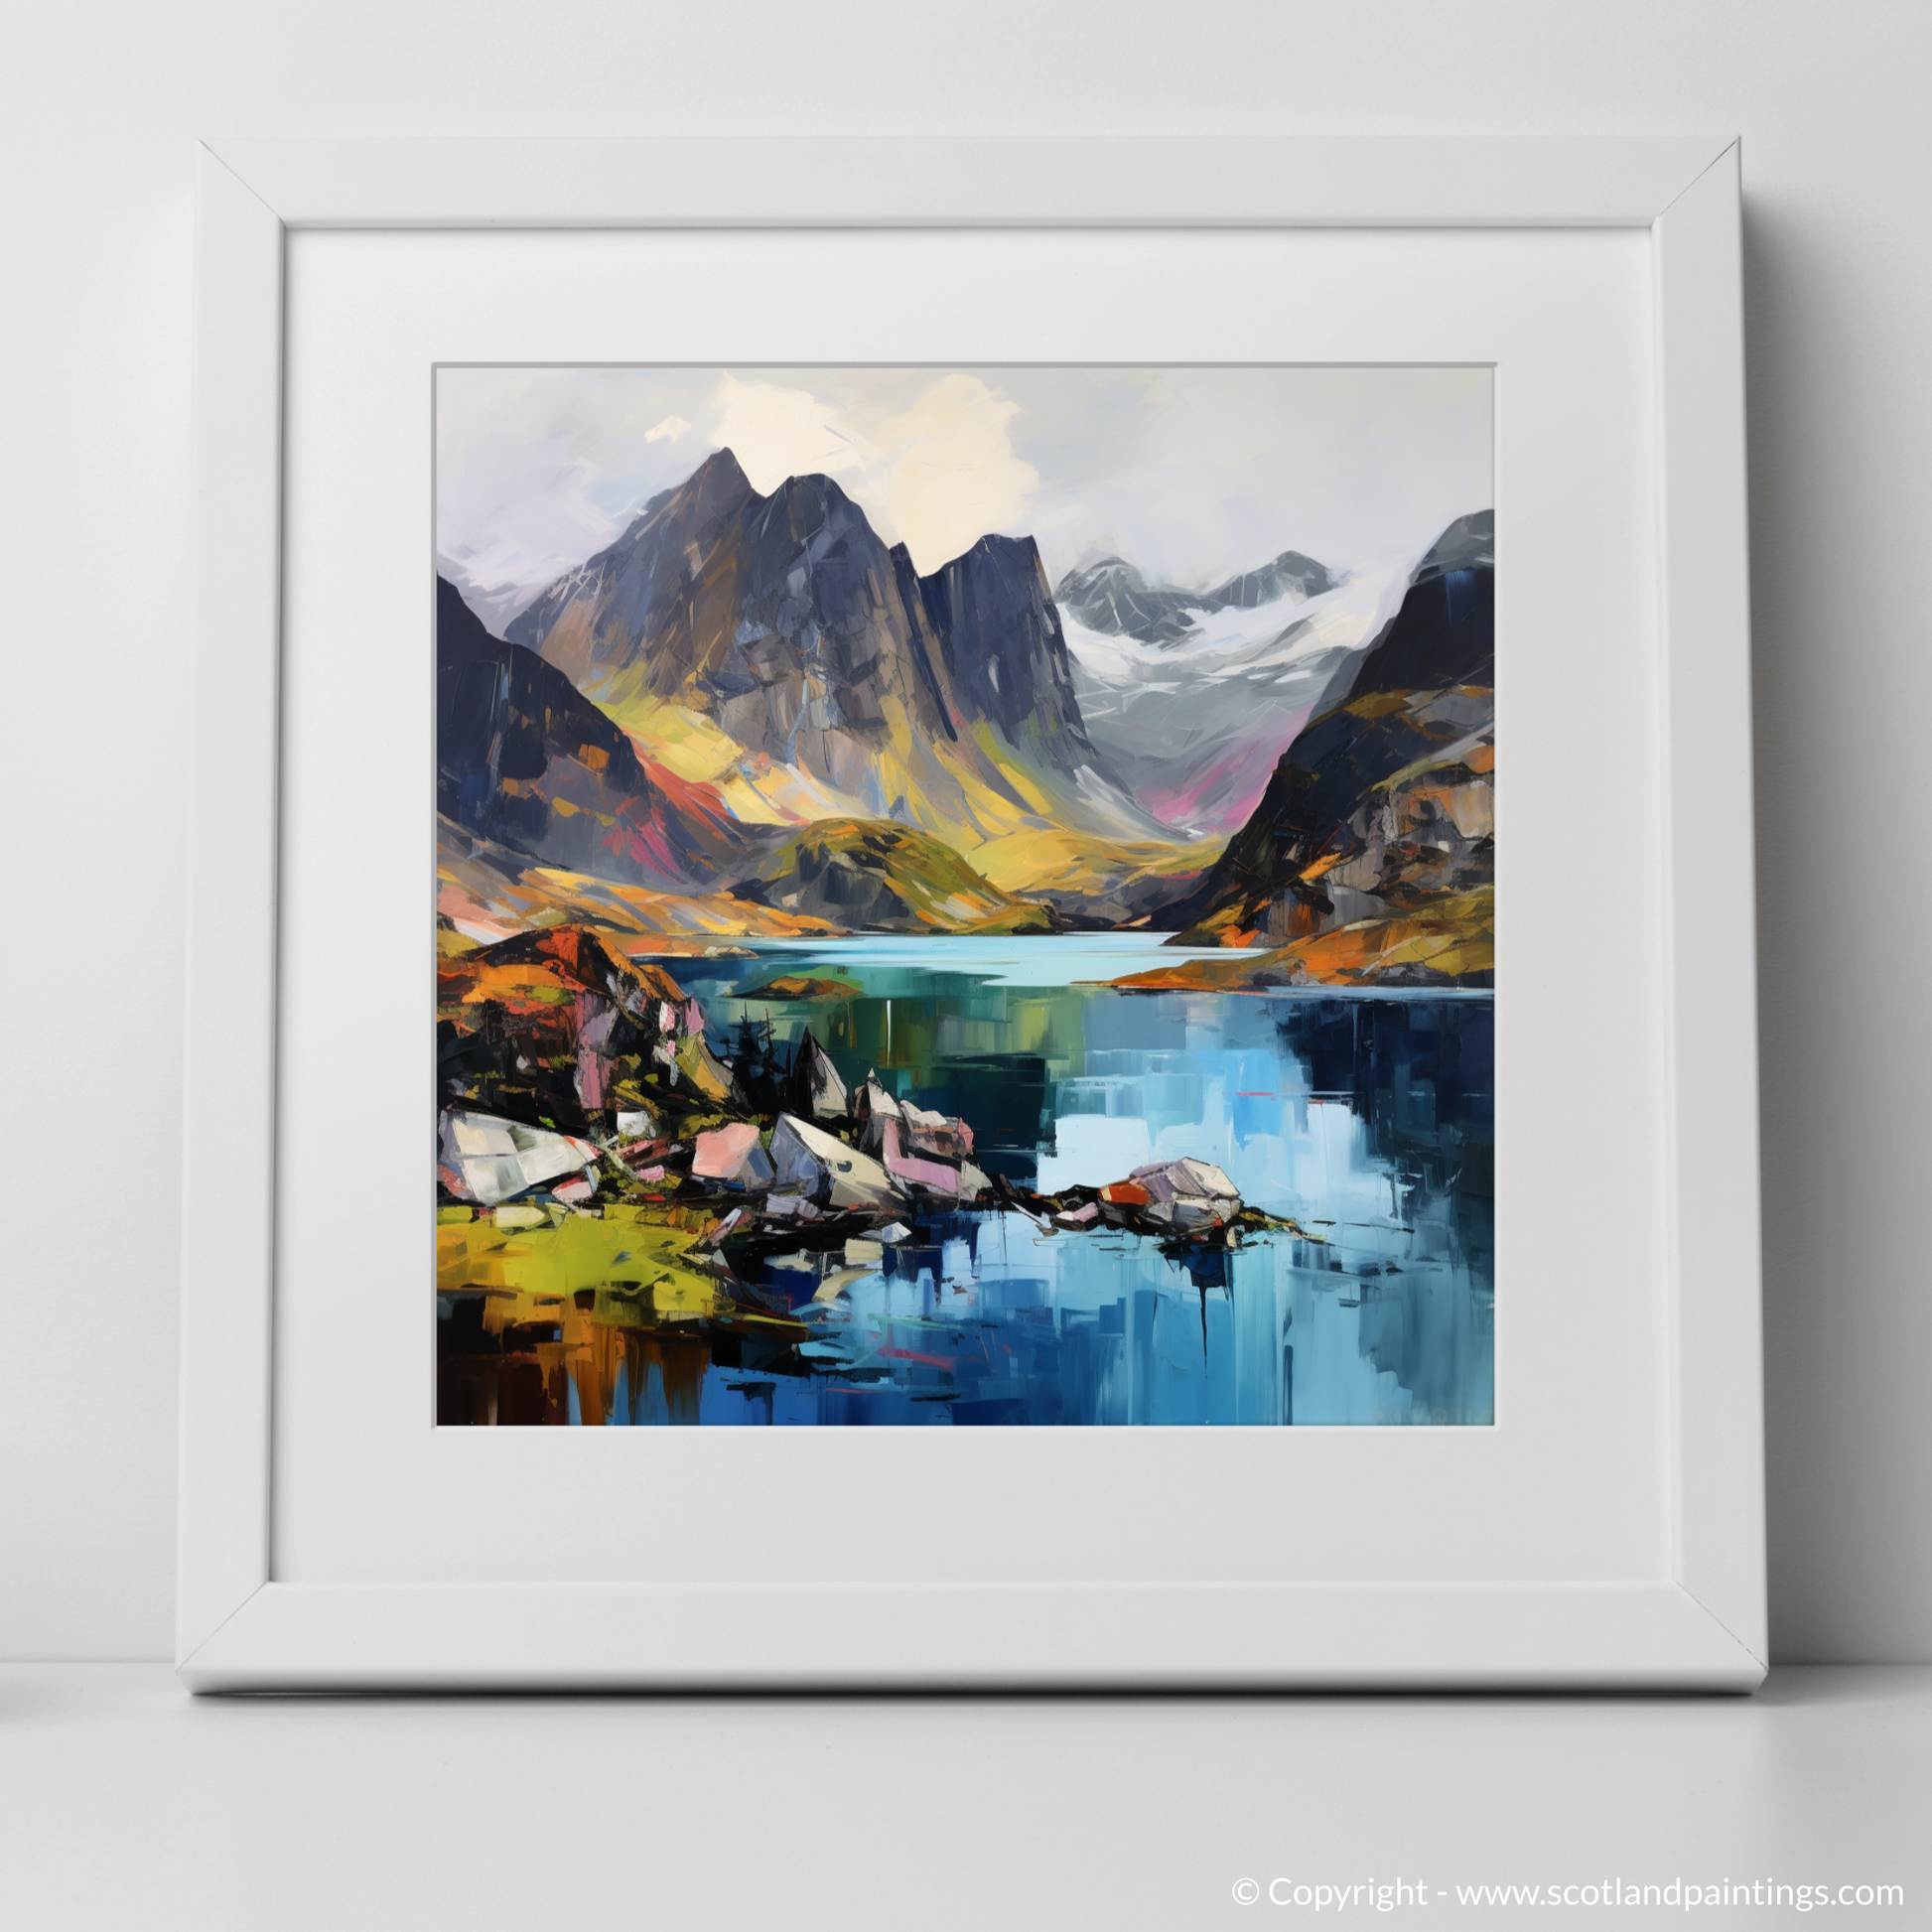 Art Print of Loch Coruisk, Isle of Skye with a white frame